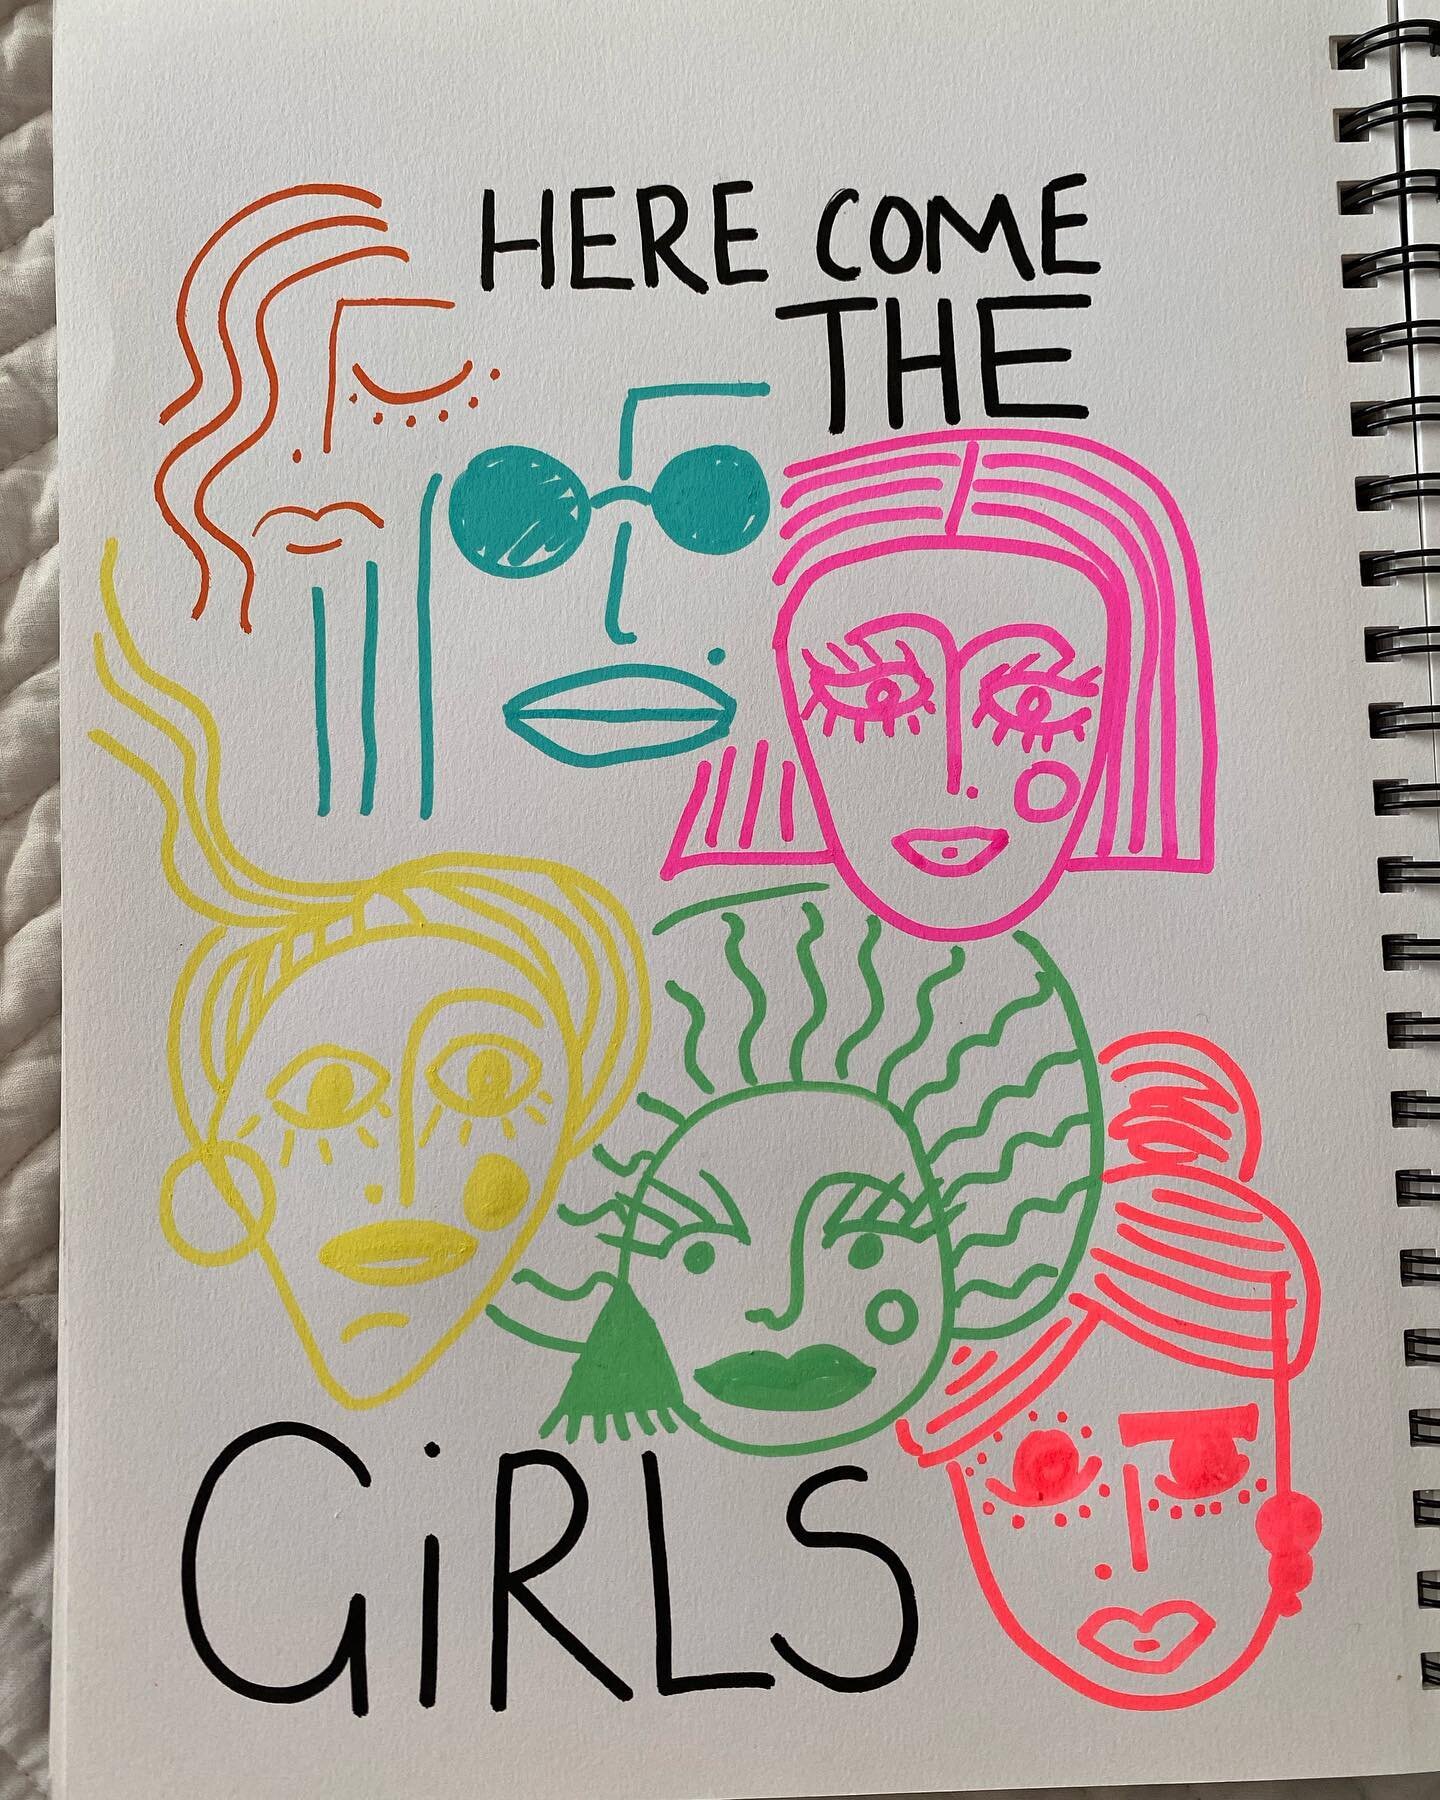 Art - Here Come The Girls sketchbook doodle.
.
A colourful doodle for a sunny bank holiday morning.
.
We had our first night away from the children in six and a half years.
.
We spent it in Exeter reminiscing about student days here and celebrating a